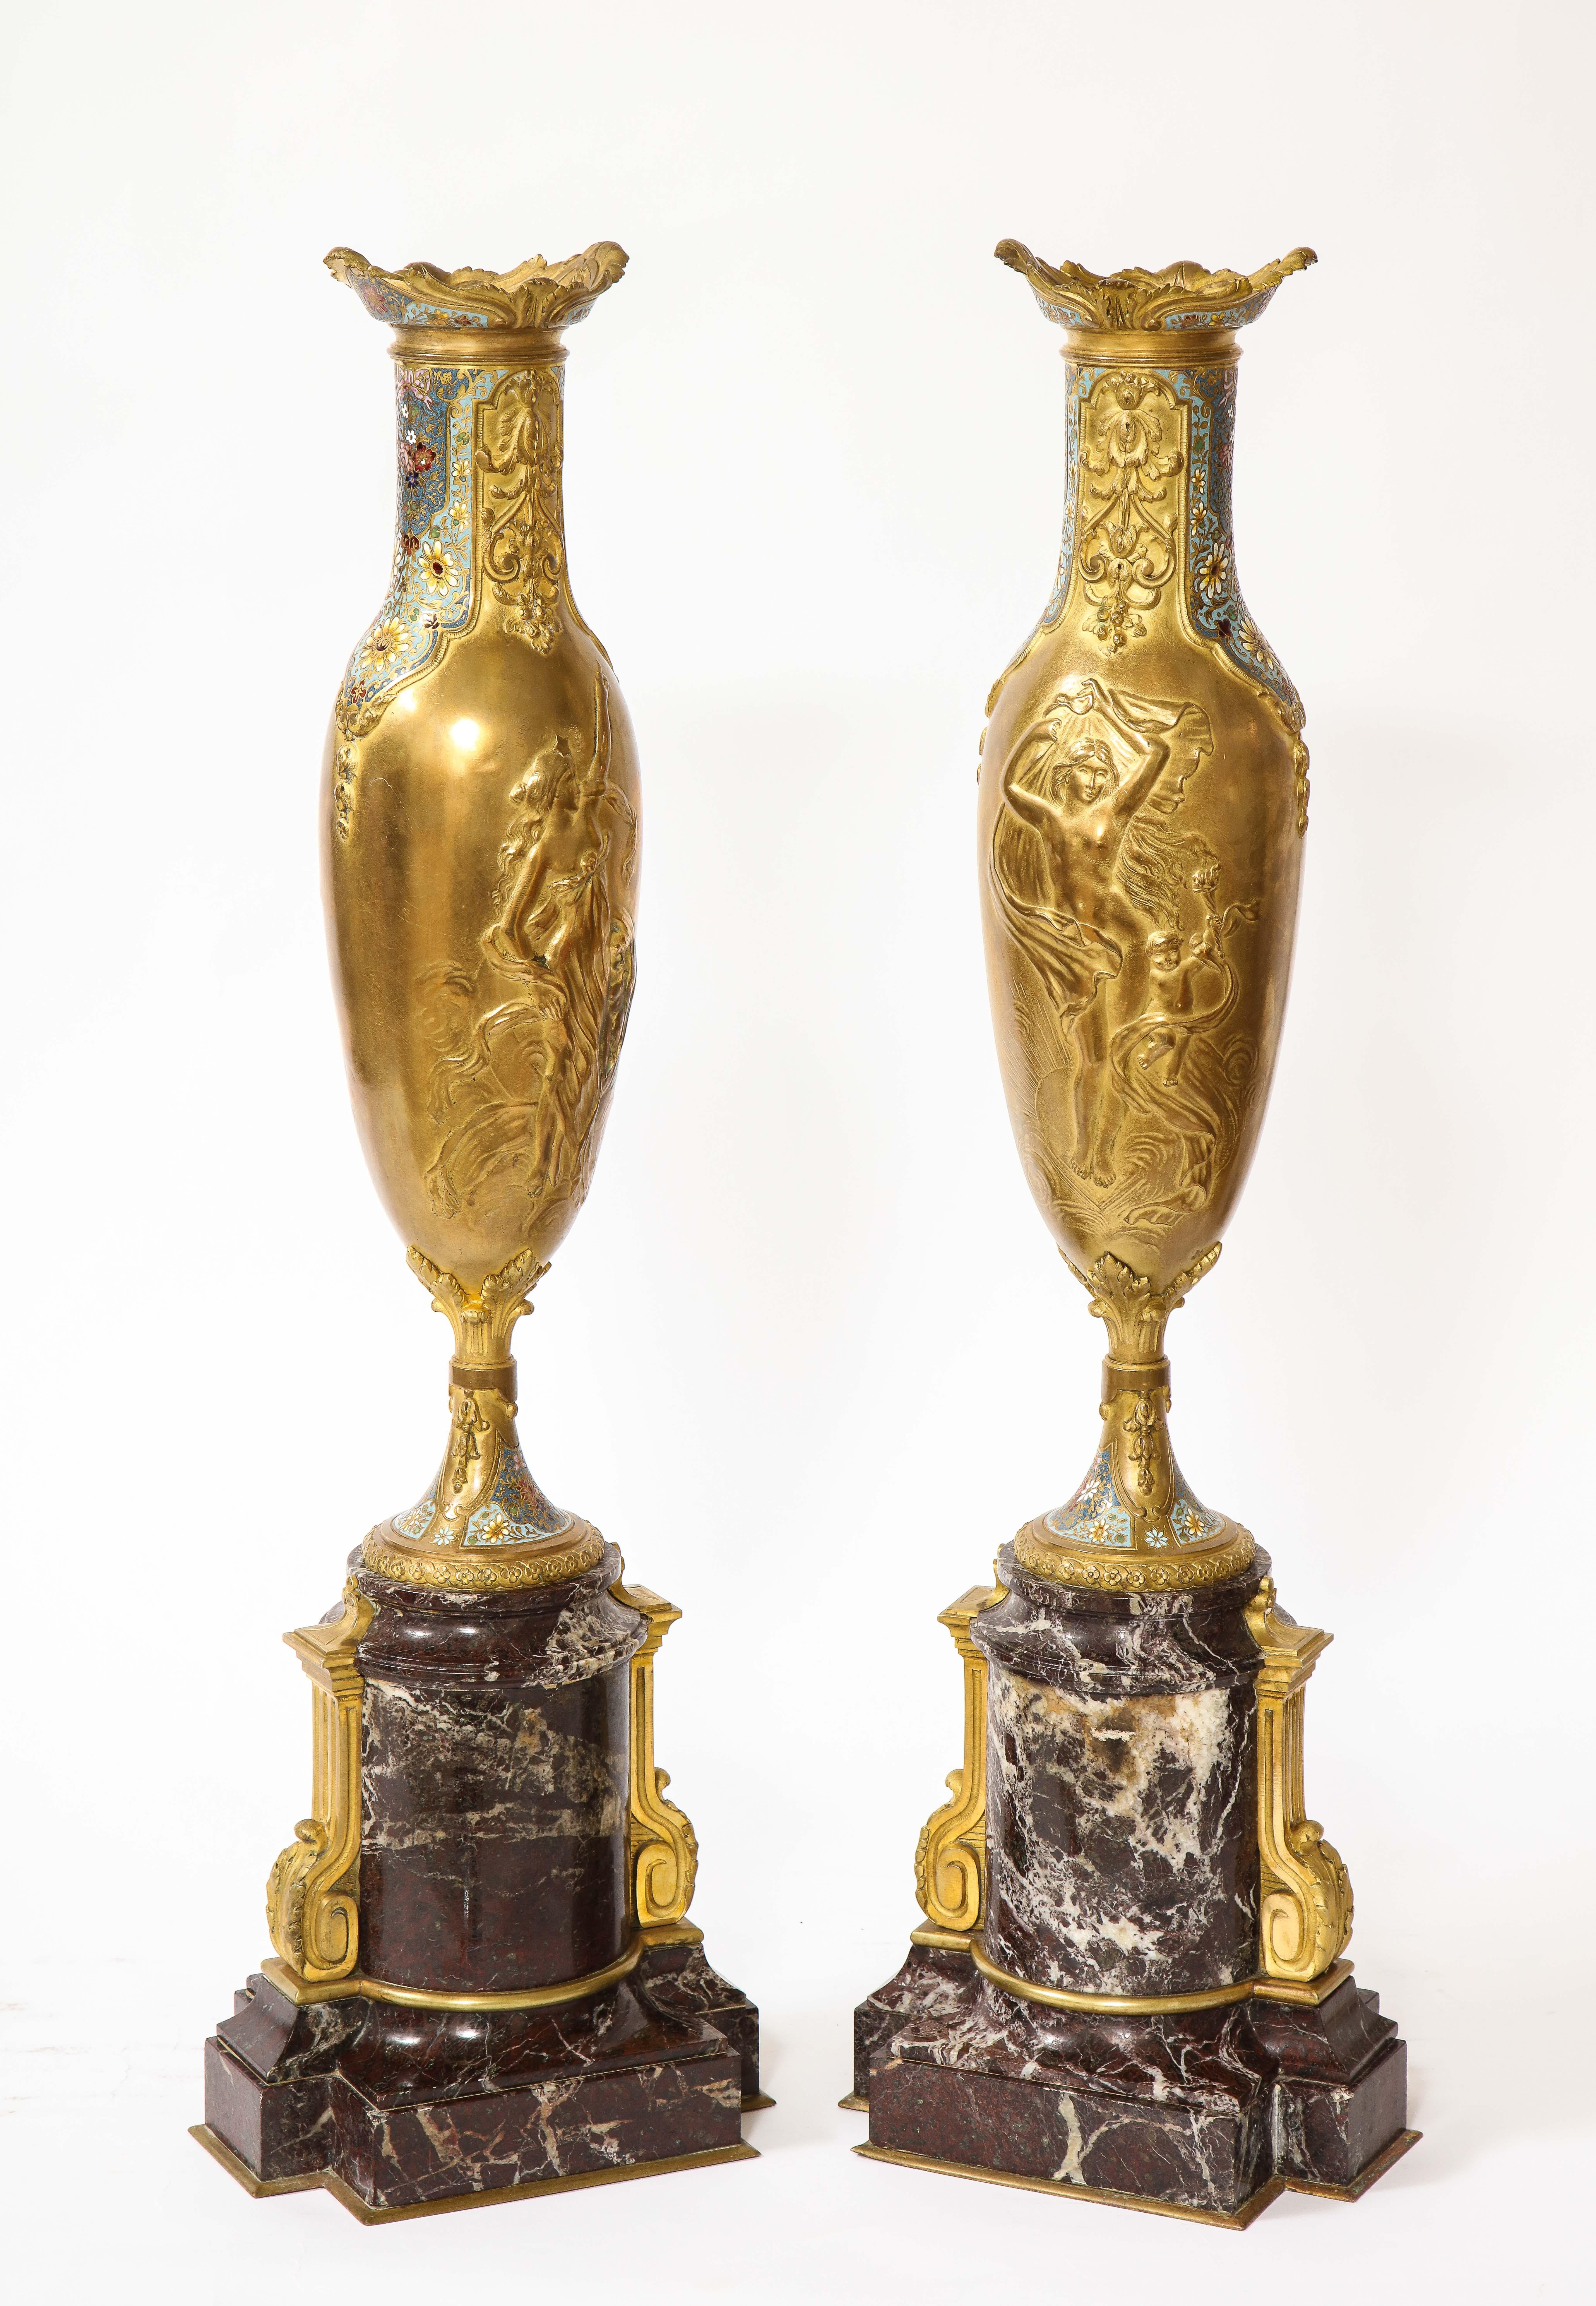 Polished Pr. French 19th C. Louis XVI Style Dore Bronze Enamel & Marble Mtd. Vases For Sale